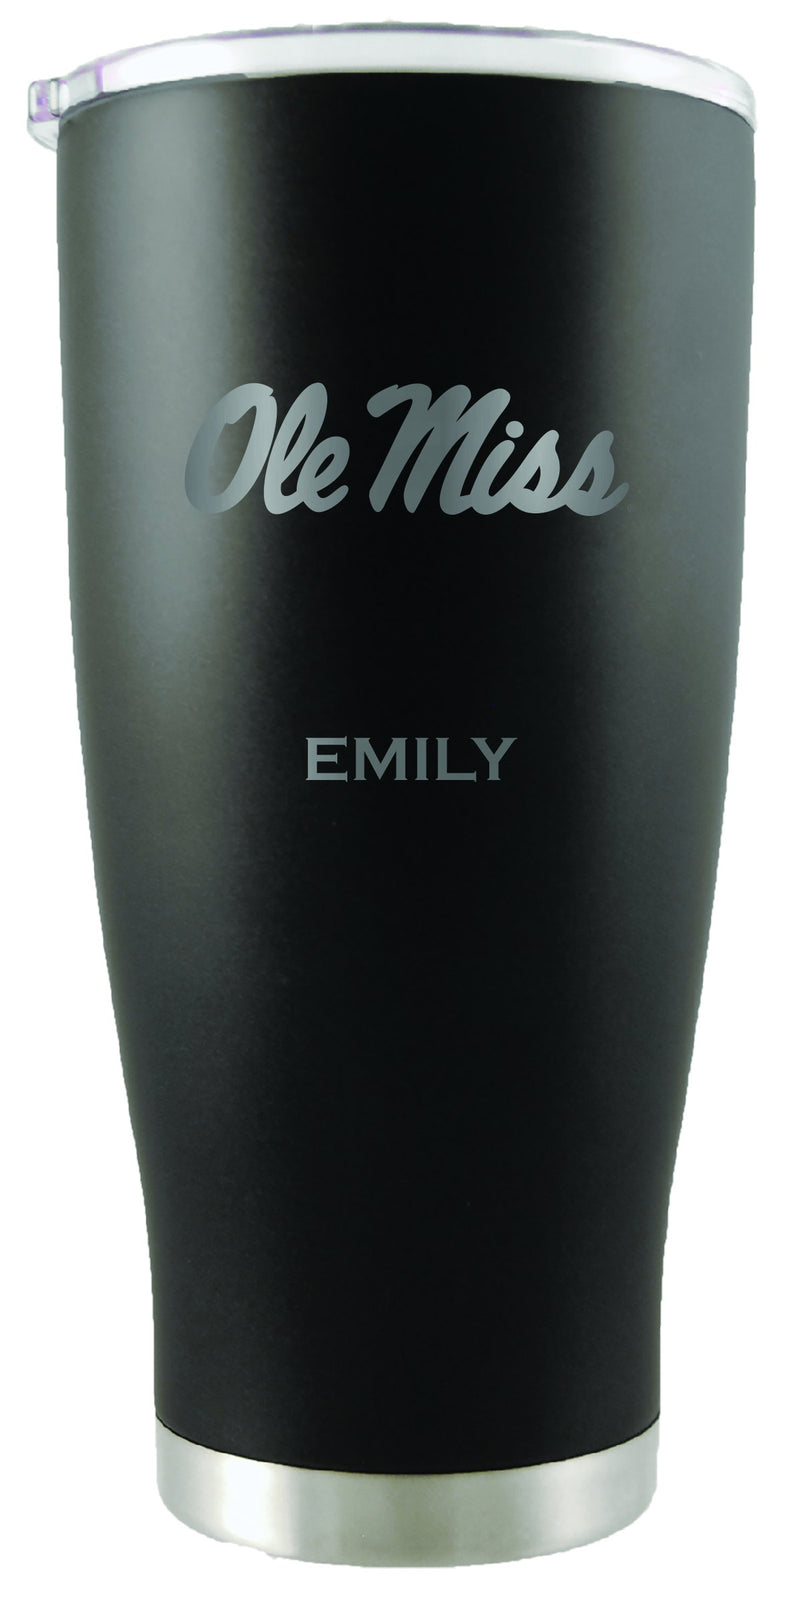 20oz Black Personalized Stainless Steel Tumbler | Mississippi
COL, CurrentProduct, Drinkware_category_All, Mississippi Ole Miss, MS, Personalized_Personalized
The Memory Company